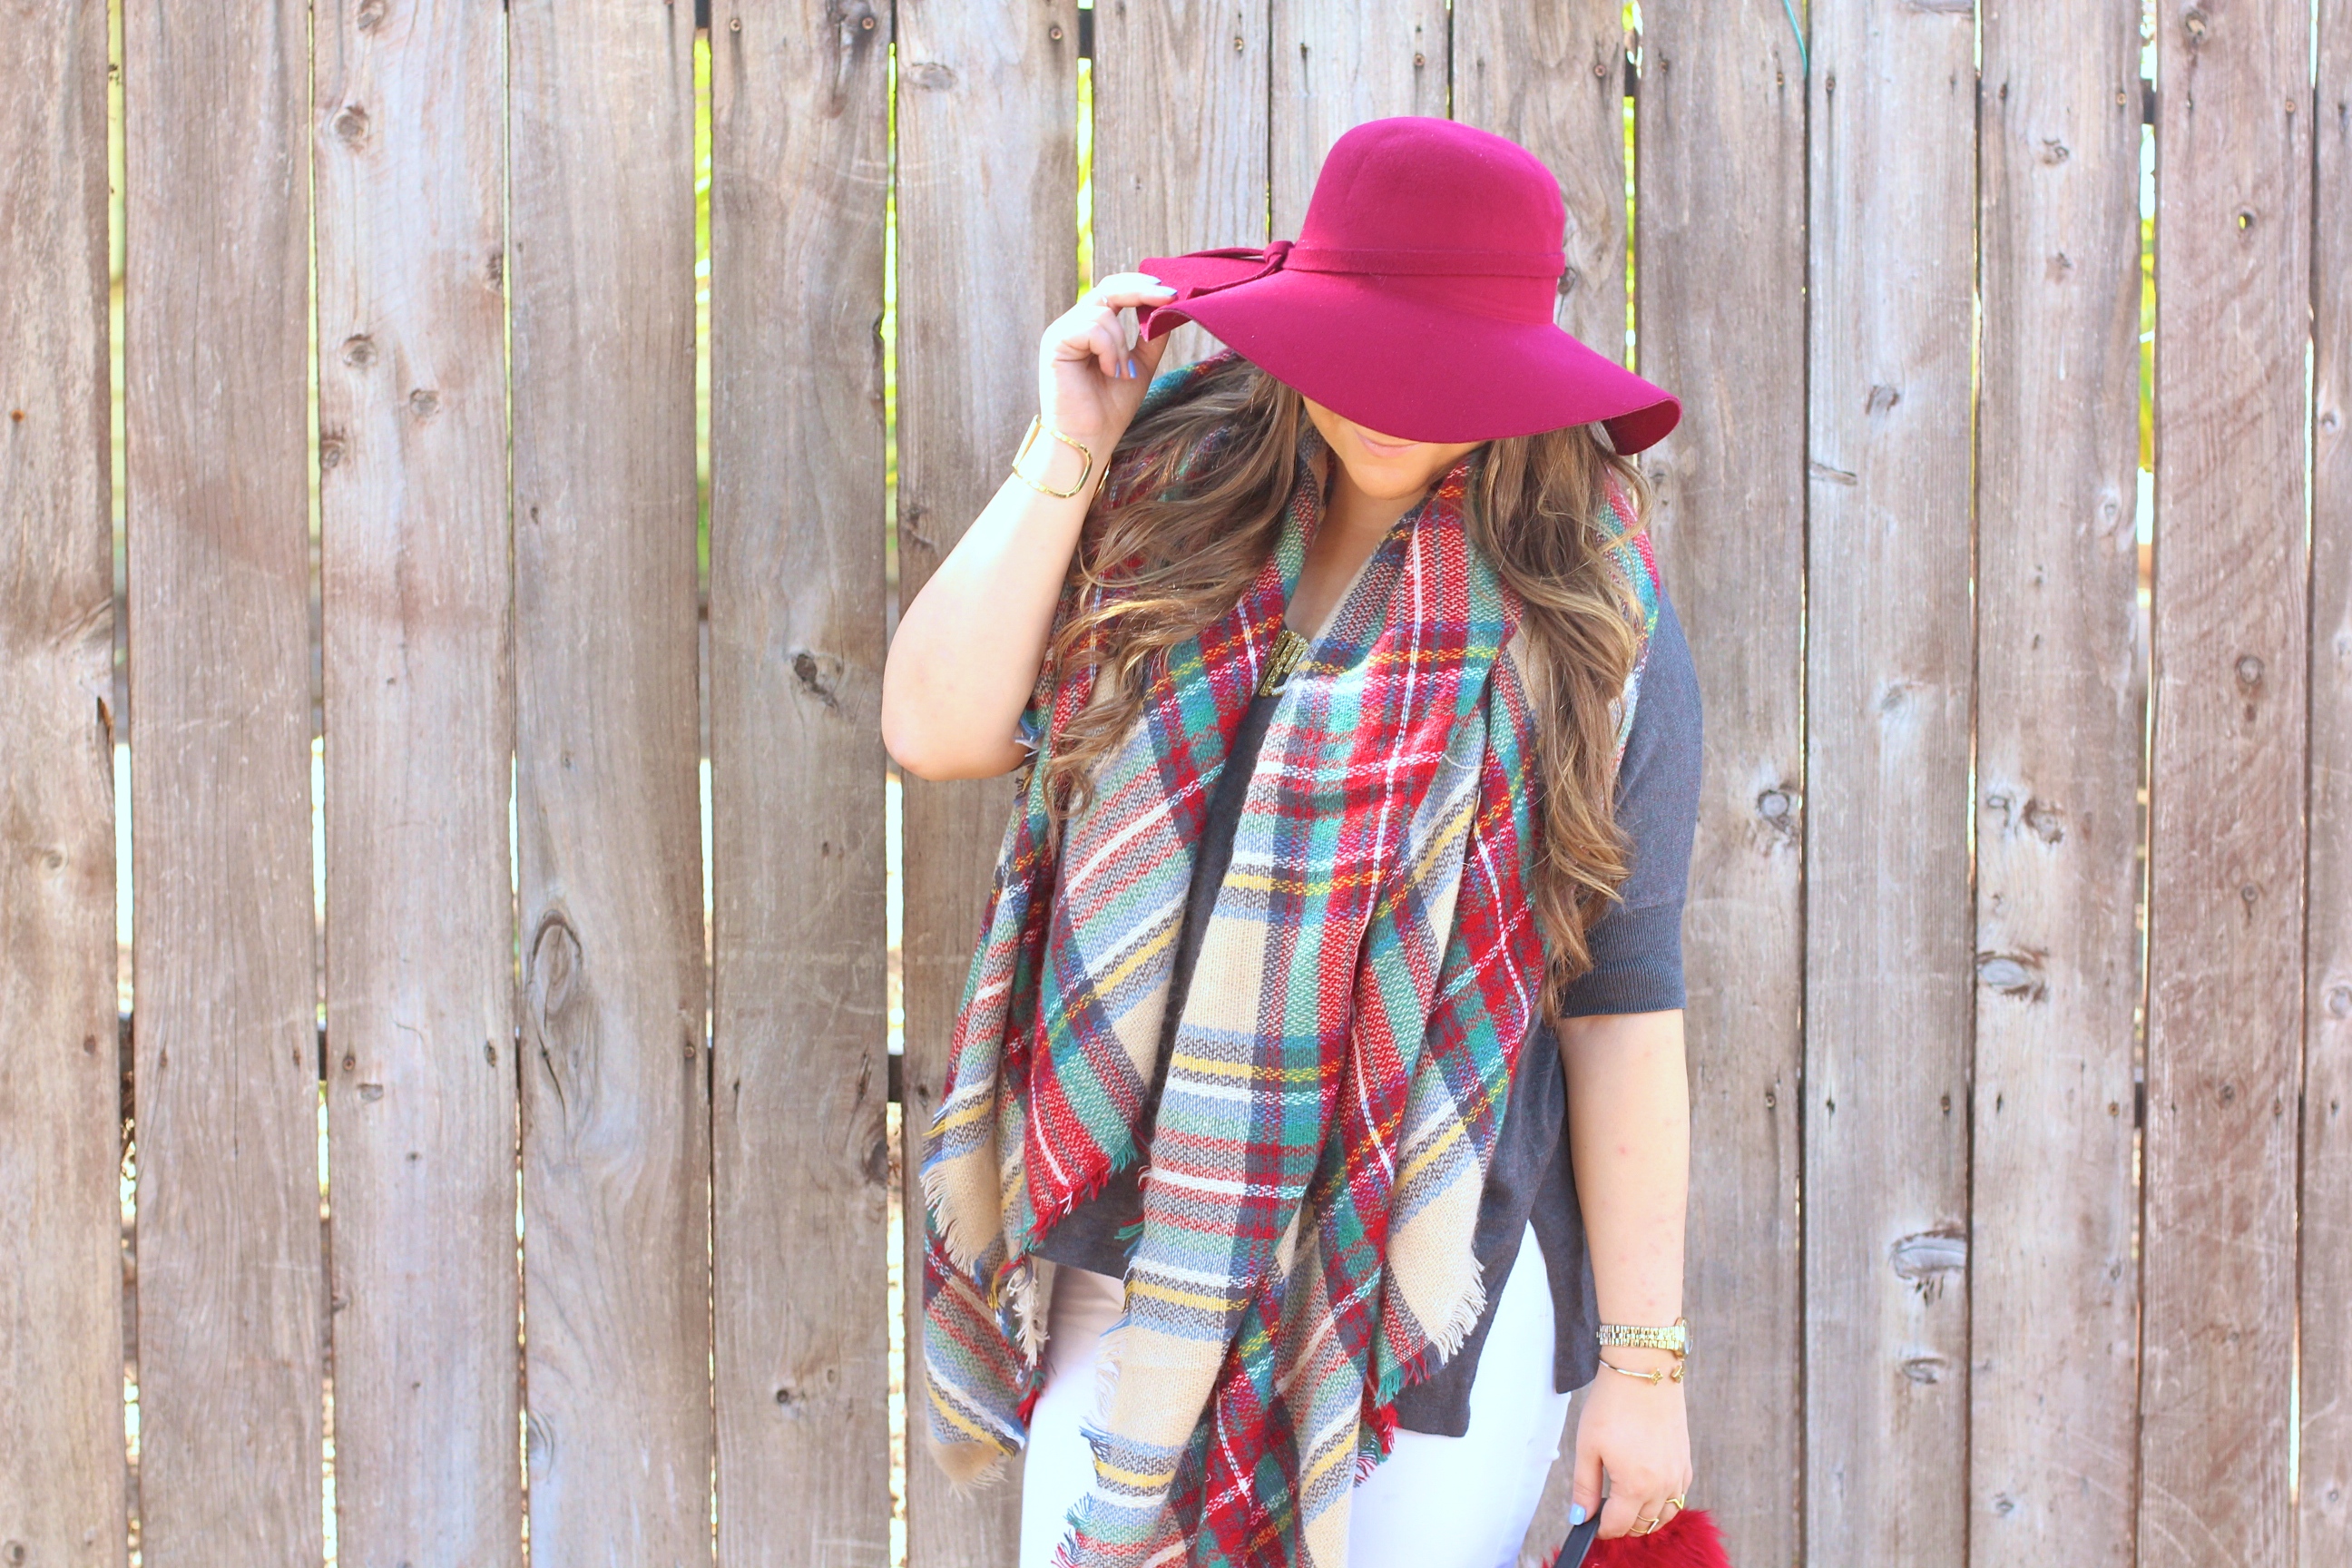 missyonmadison, fashion blogger, blanket scarf, blanket scarves, how to wear a scarf, how to wear a blanket scarf, la blogger, fall style, gift guide, gift guide 2015, sales, scarves on sale, kohls, nordstrom, etsy, asos, holiday gift guide, gift ideas, 